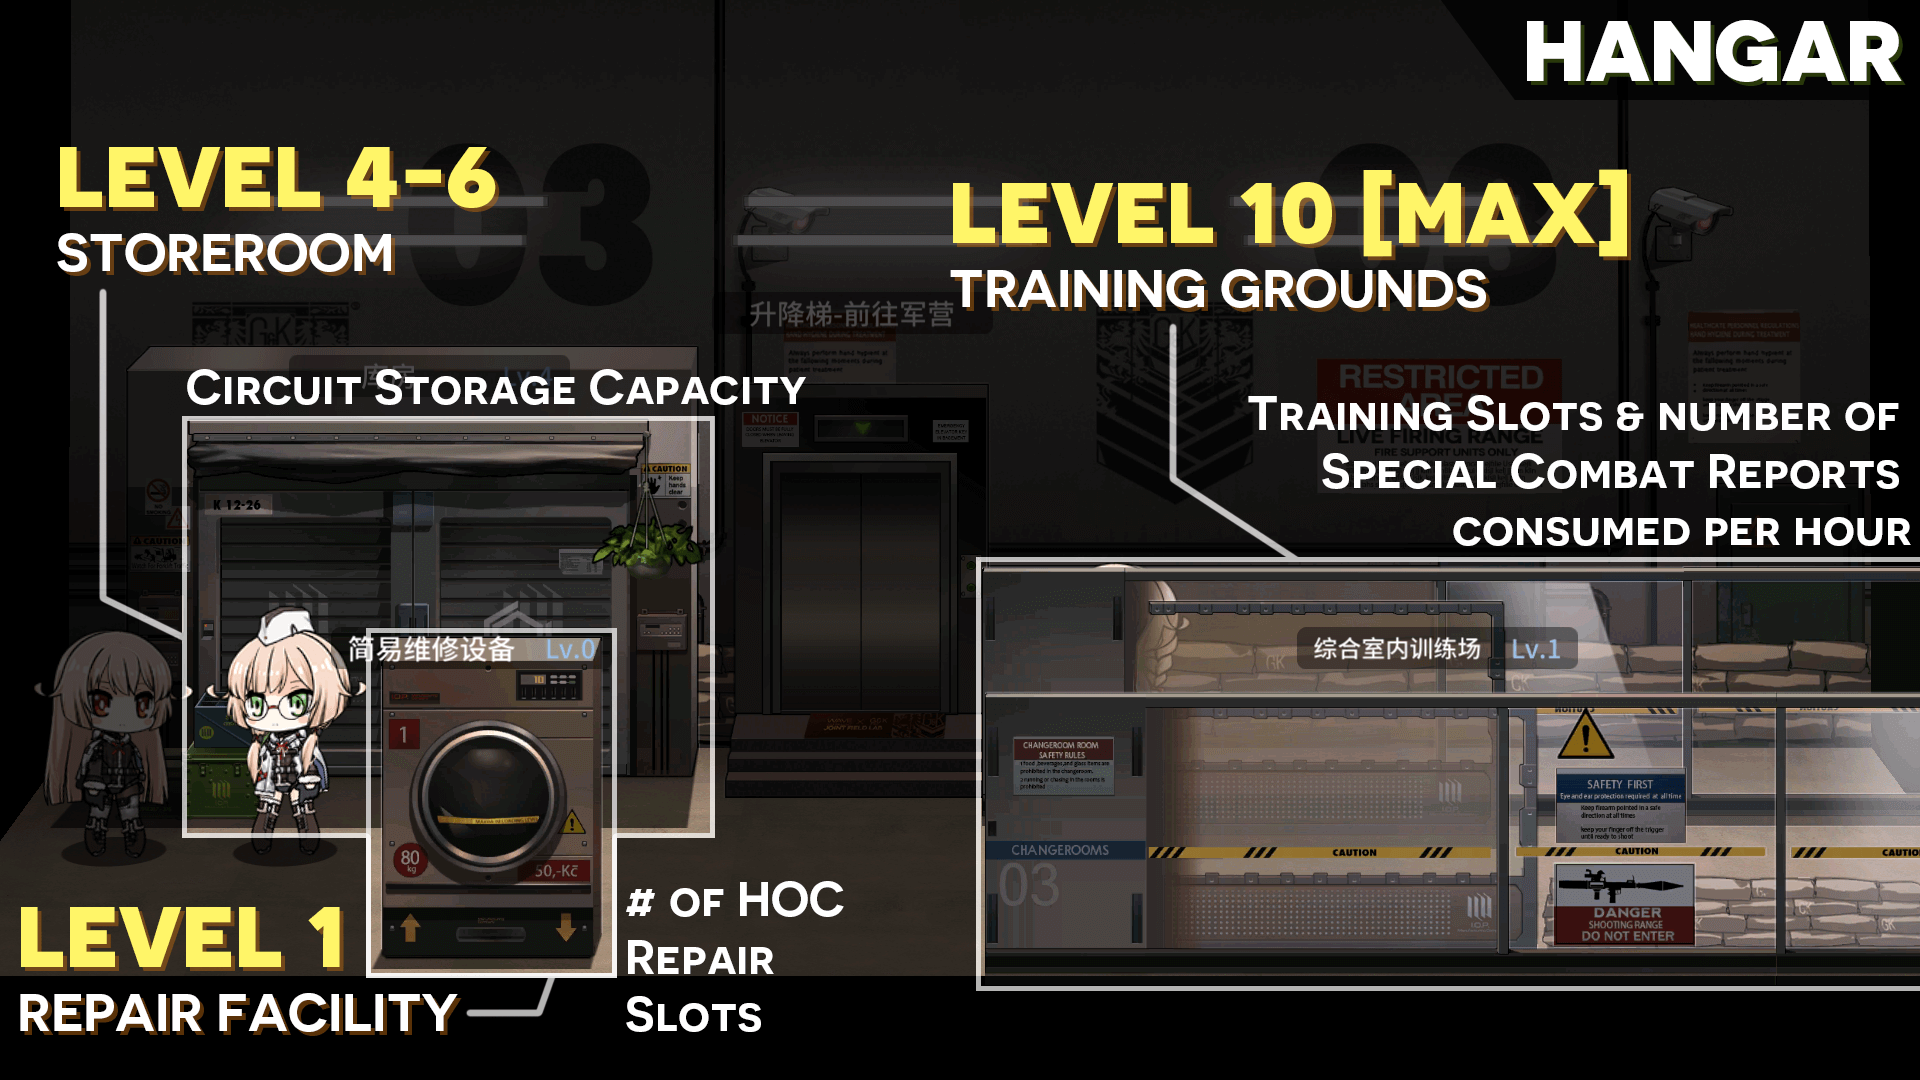 TL;DR Infographic on upgrading the Hangar facilities